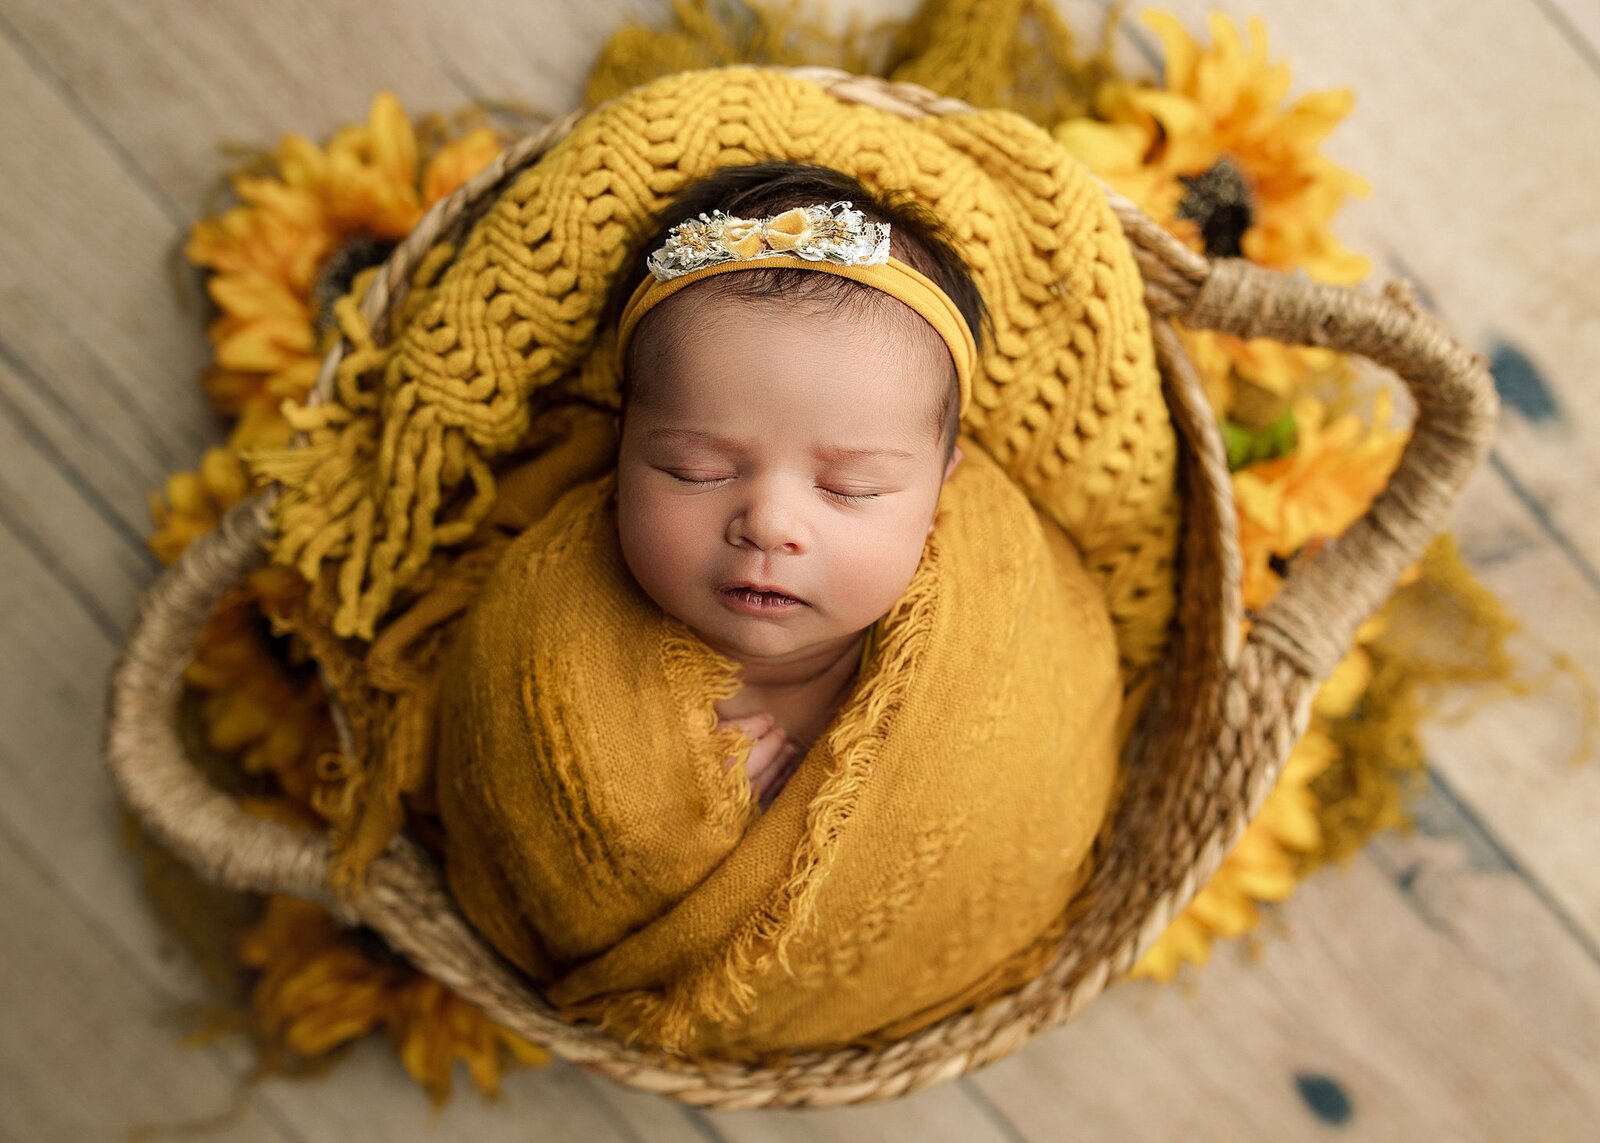 baby girl wrapped in yellow in a basket prop.